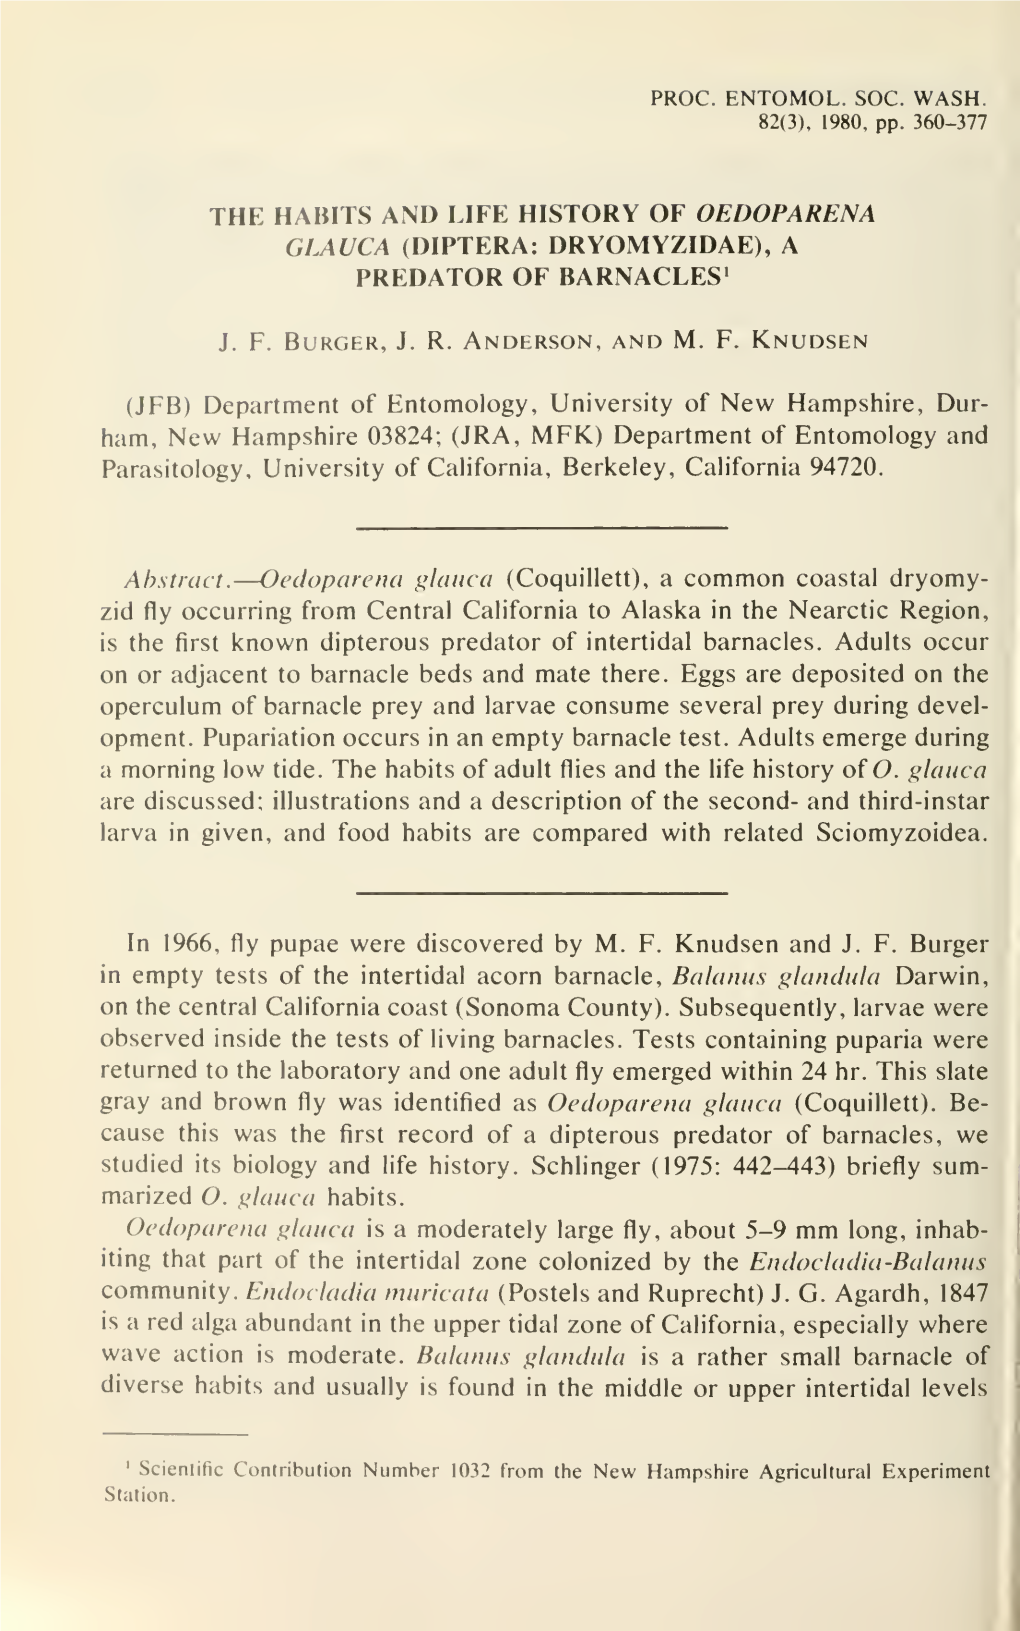 PROCEEDINGS of the ENTOMOLOGICAL SOCIETY of WASHINGTON the Reproductive Organs and the Digestive System